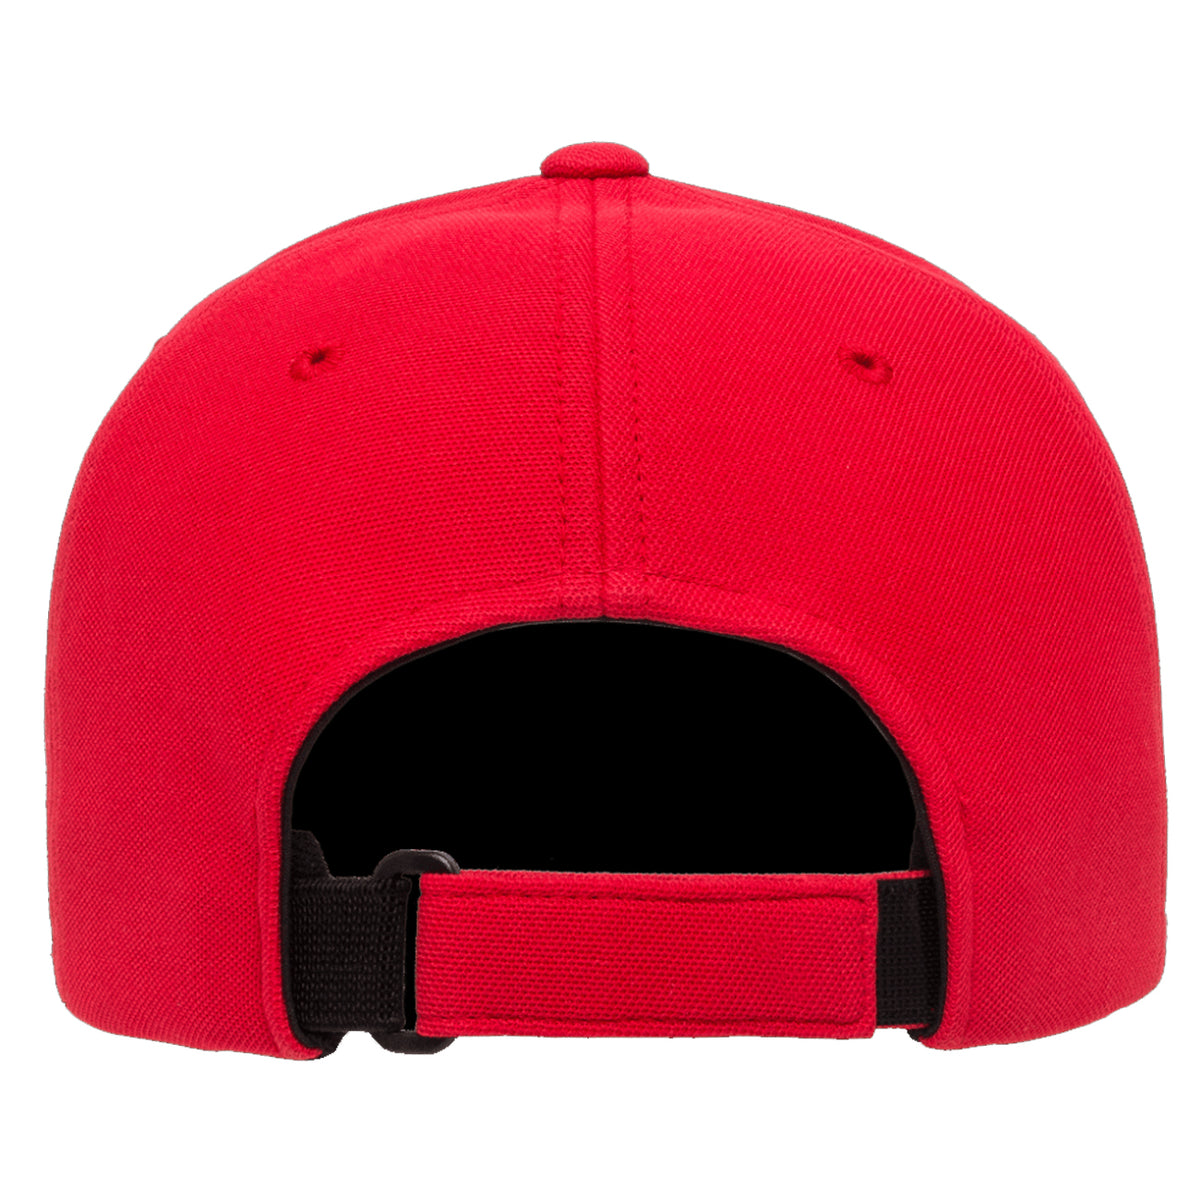 Strap Caps w/ – & Dry Velcro Yupoong-Flexfit Mini Pique 2040USA Hats Cool 6-Panel and